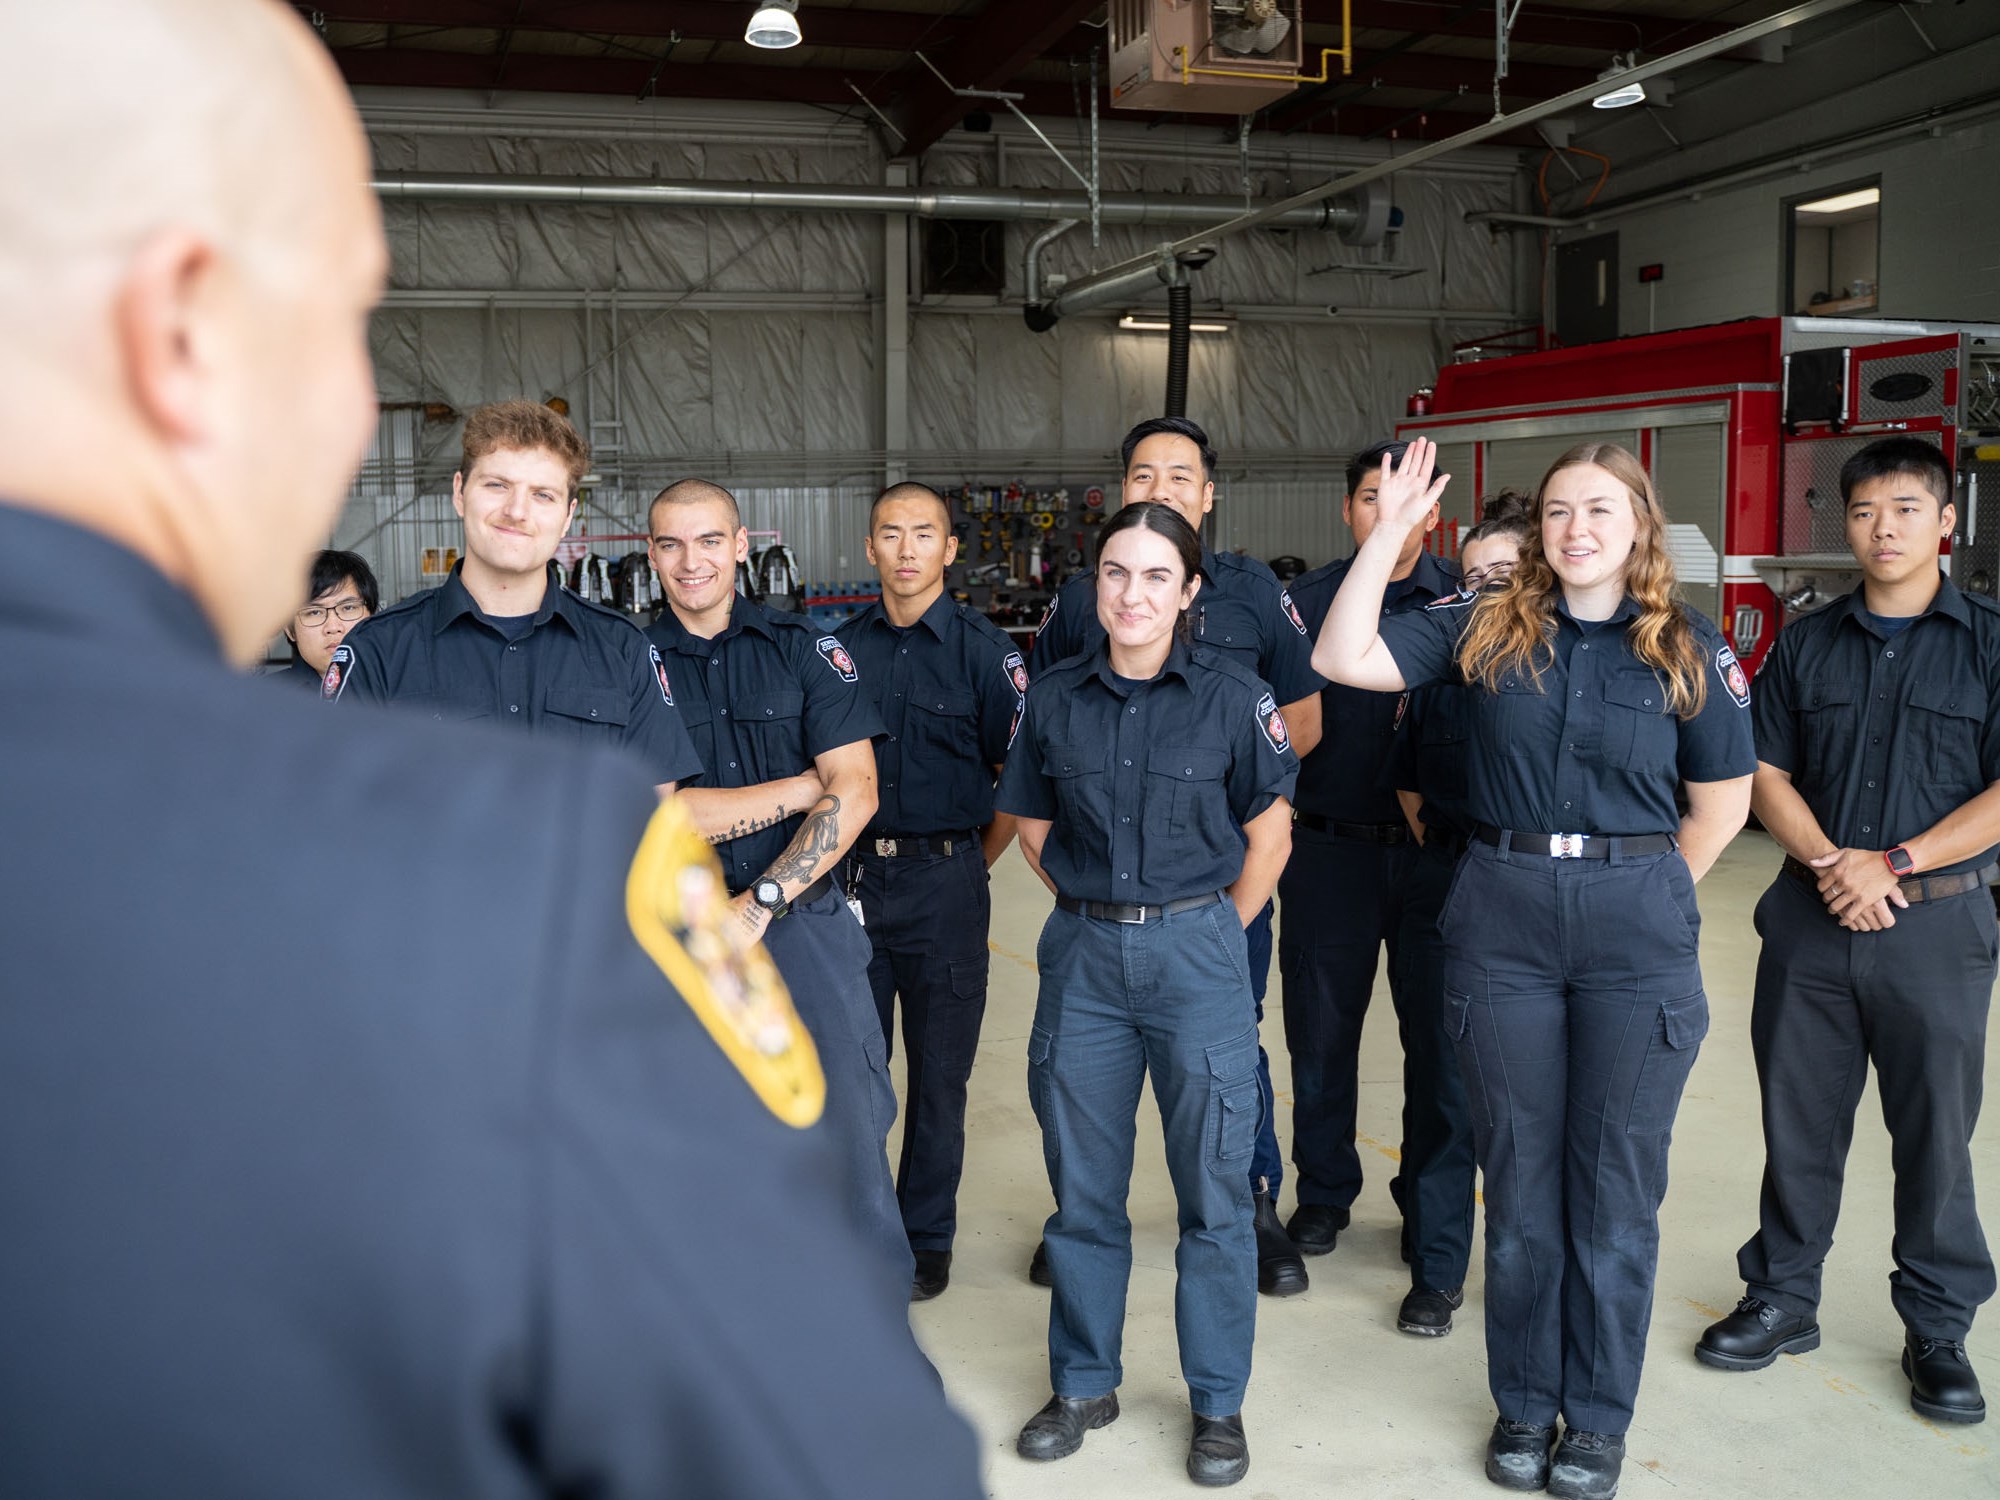 Seneca and Brampton Fire &amp; Emergency Services partner to boost representation among firefighters